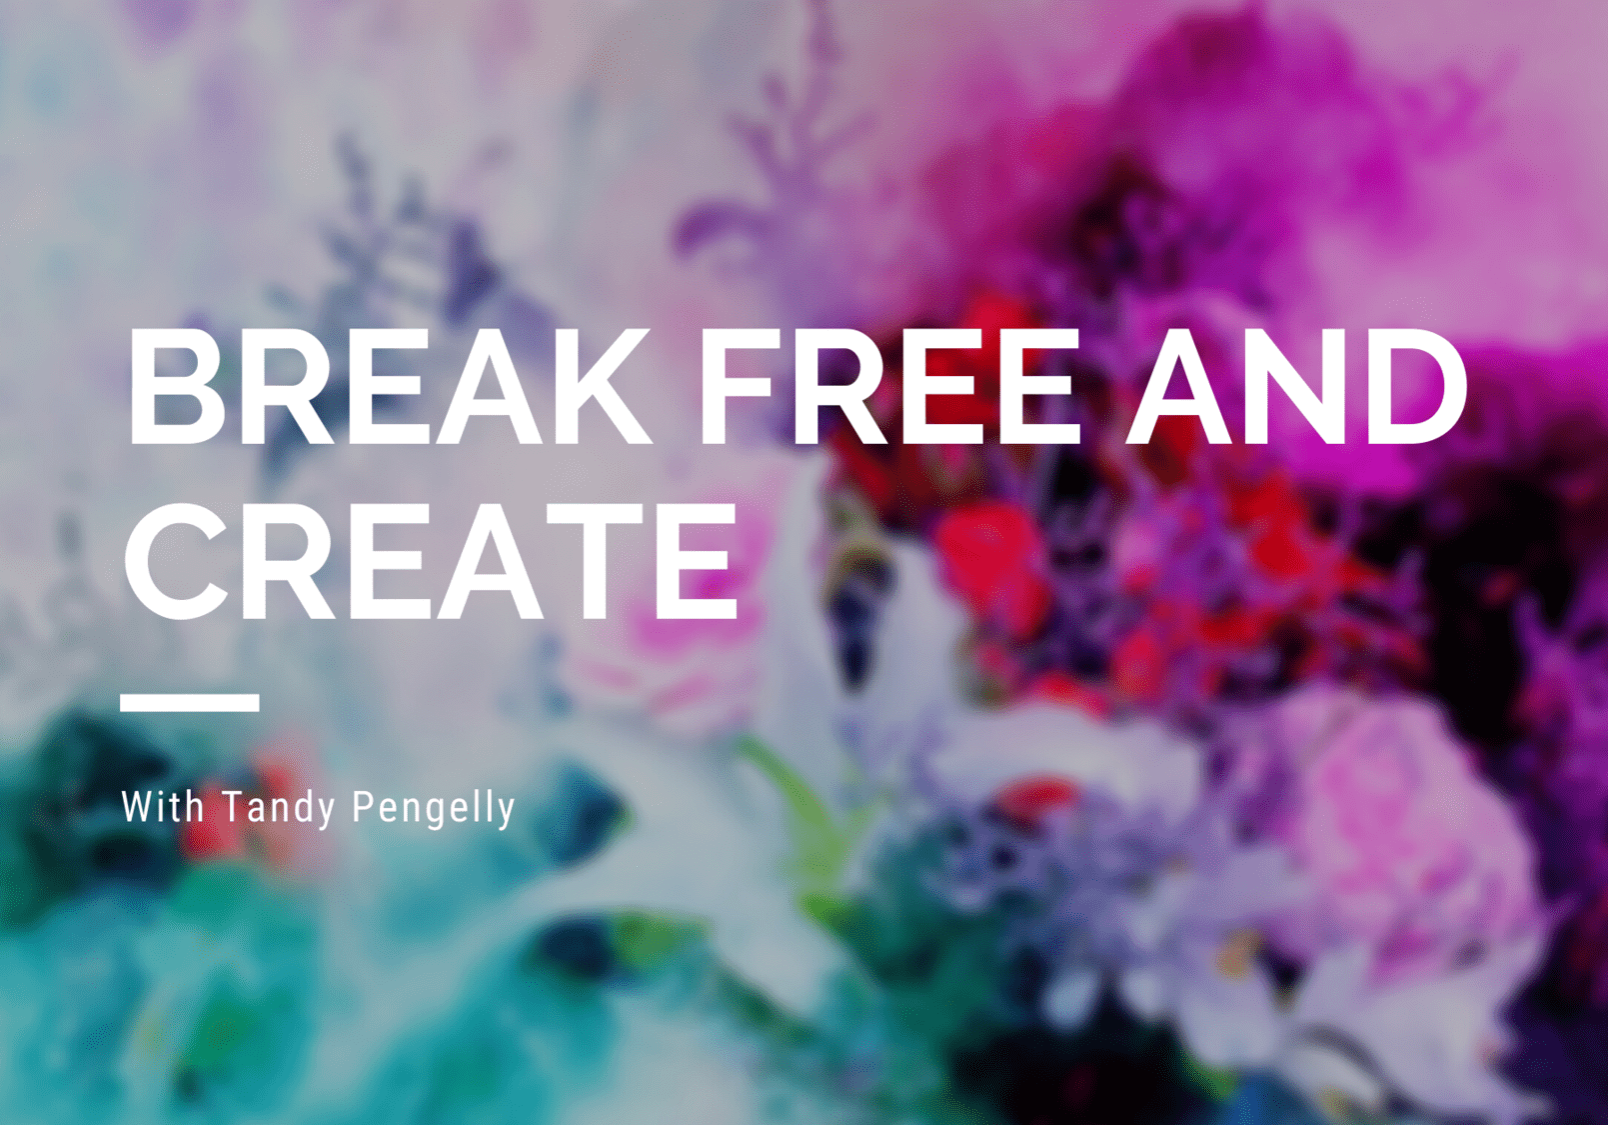 Break Free and Create e-course with Tandy Pengelly